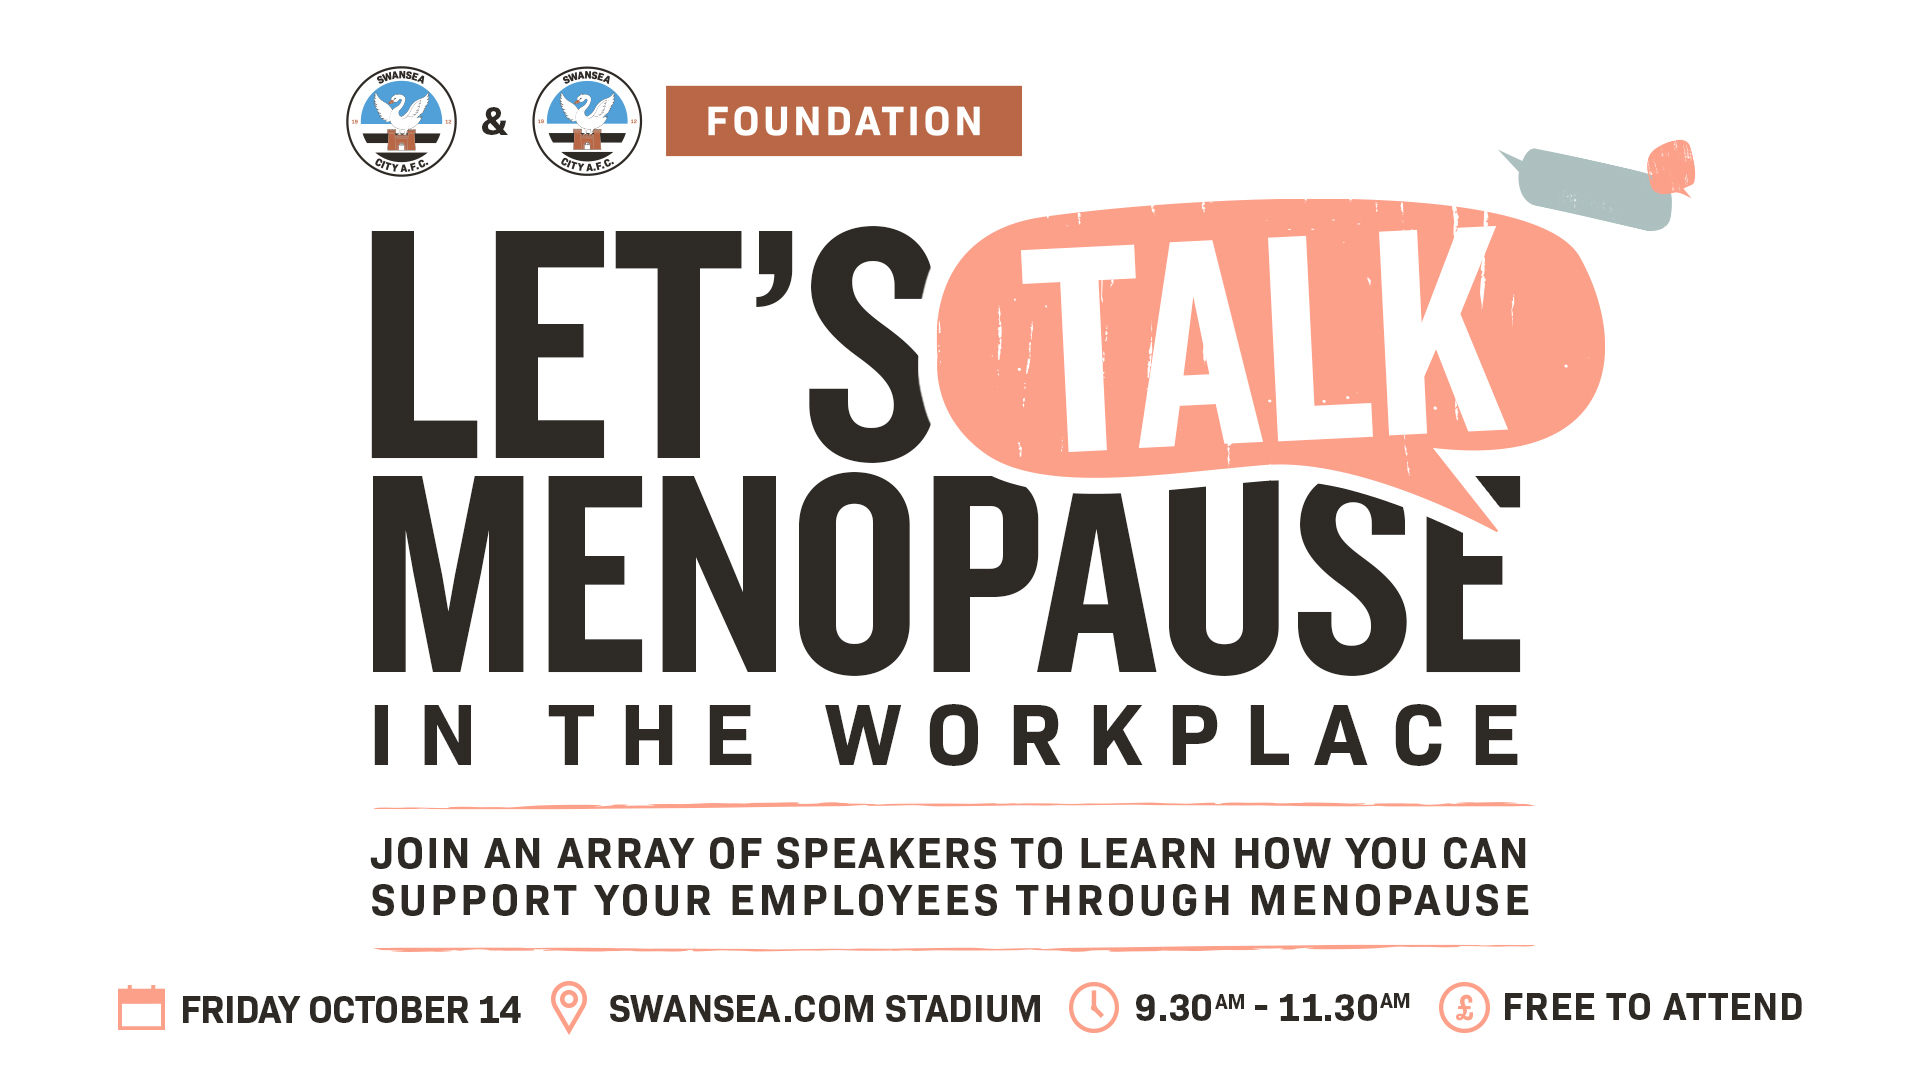 Let's talk menopause in the workplace | October 14, Swansea.com Stadium, 9.30am-11.30am.